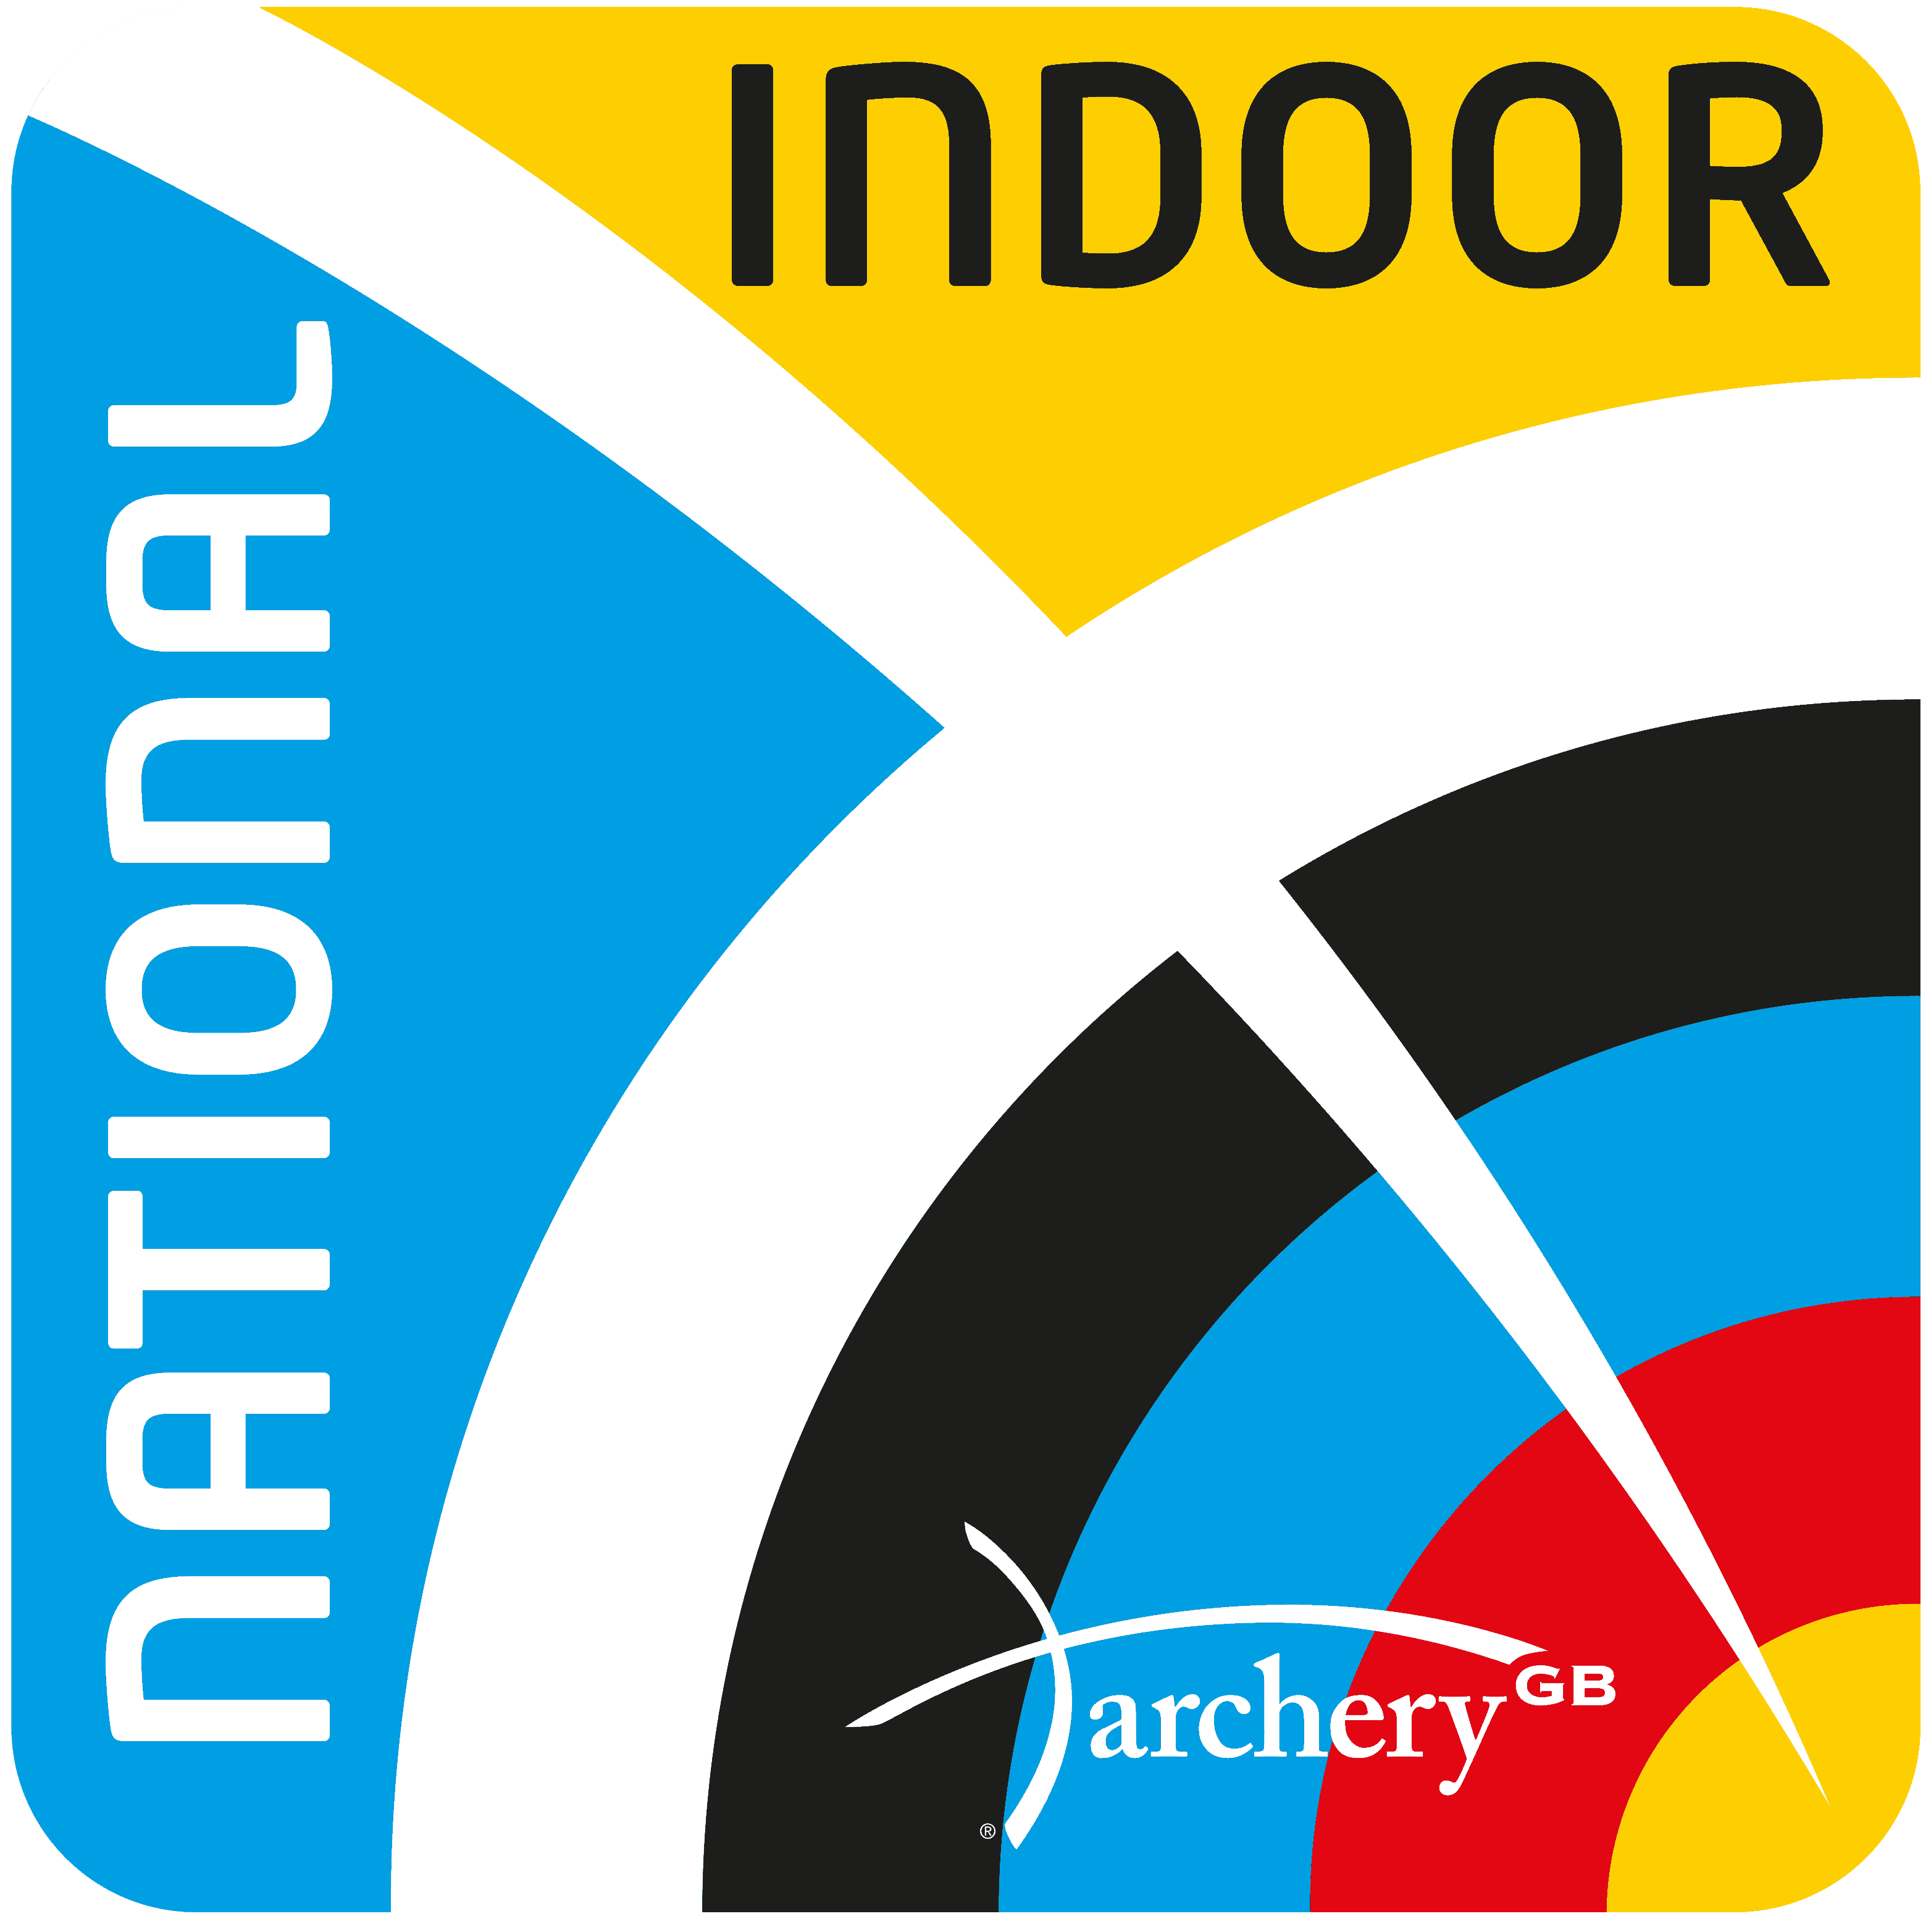 The National Indoor Championships announcement